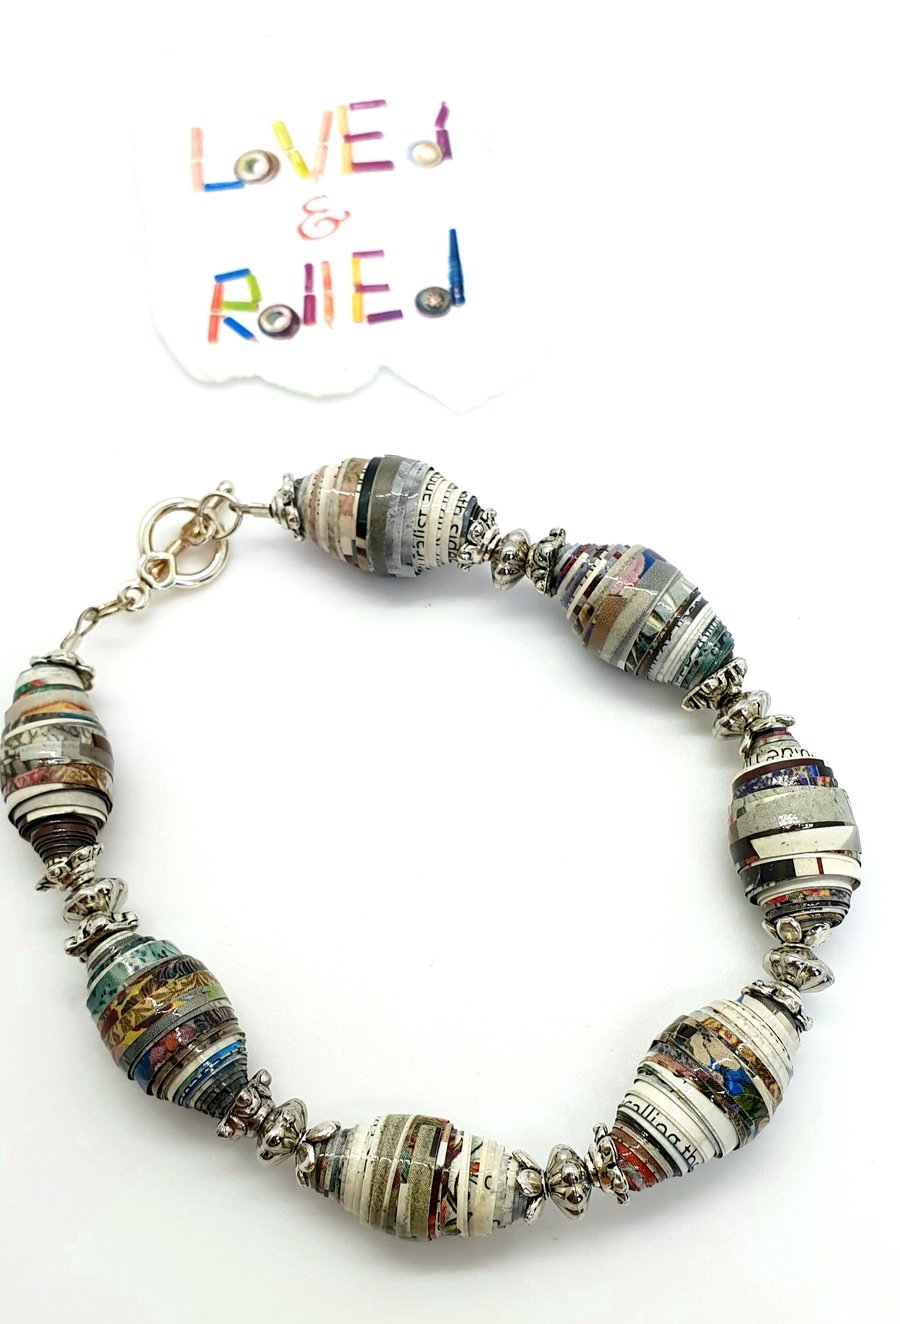 Bracelet made of blue and multicolored paper beads